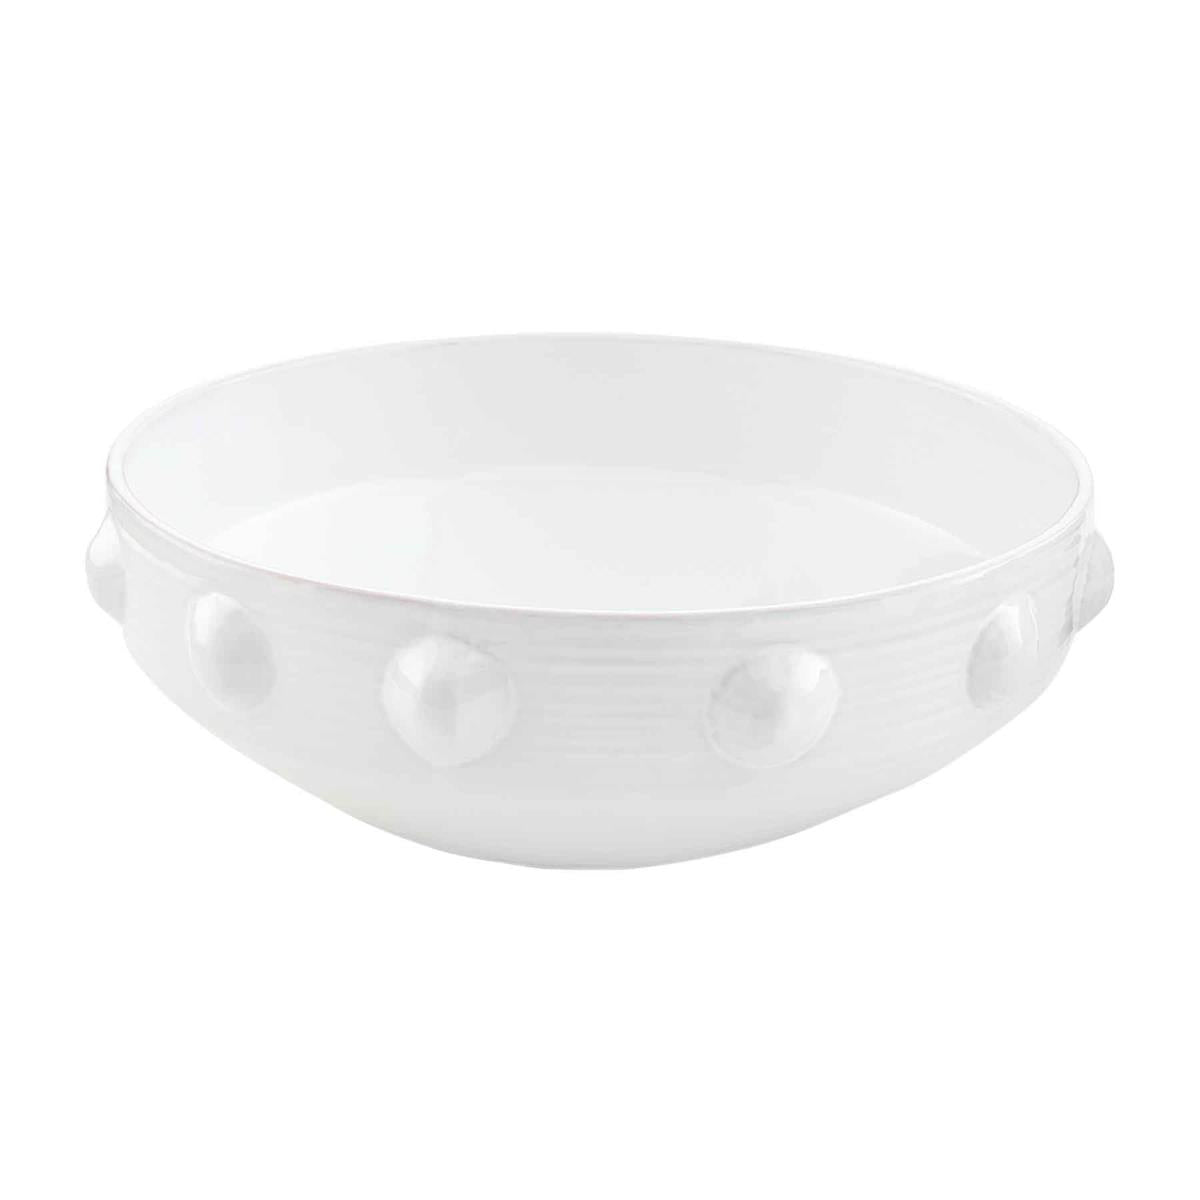 raised dot serving bowl on a white background